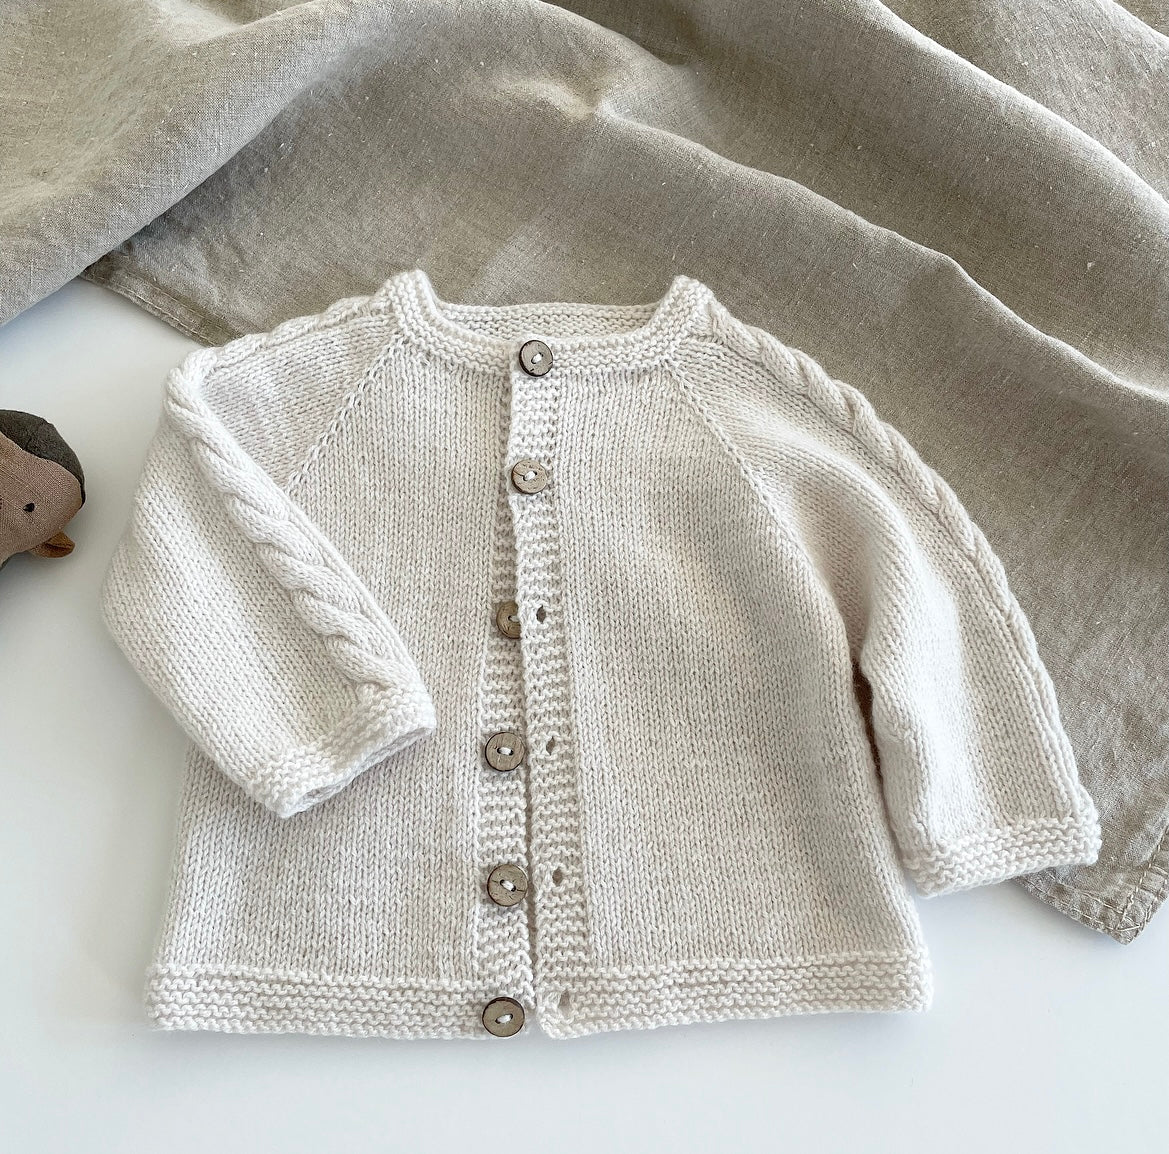 Cardigans, Tops and Vests - Knitting for Sif